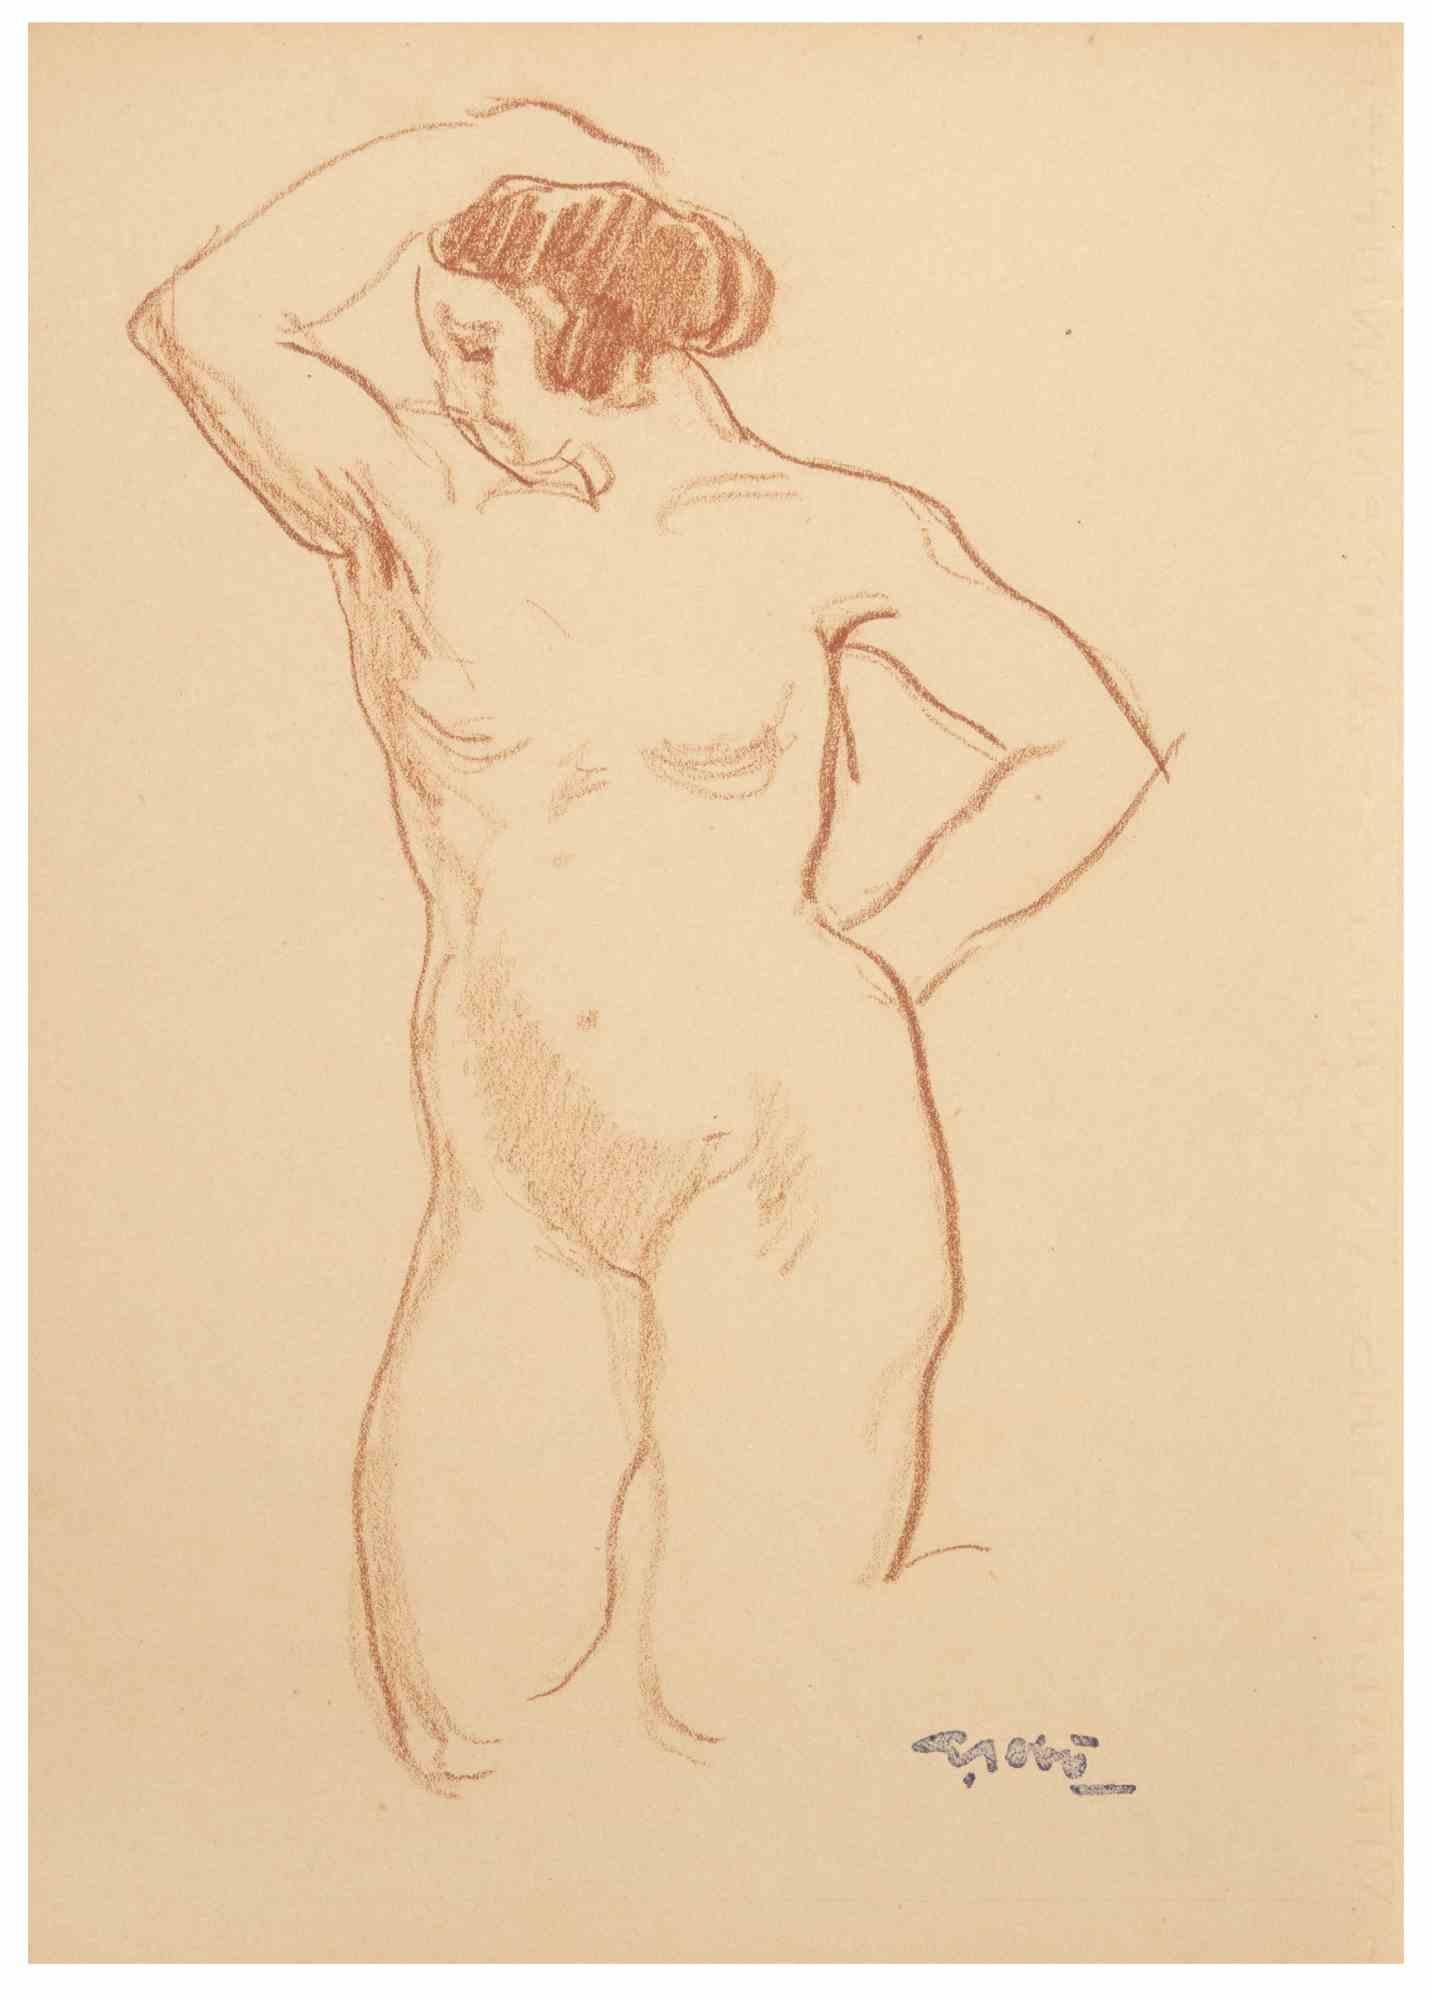 Nude is a Pastel Drawing realized by Georges Gobo (1876-1958).

Good condition on a yellowed paper.

Hand-signed by the artist on the lower right corner.

Georges Gobo or Georges Gobô , pseudonym of Georges Gobeau , born on June 19 , 1876 in San